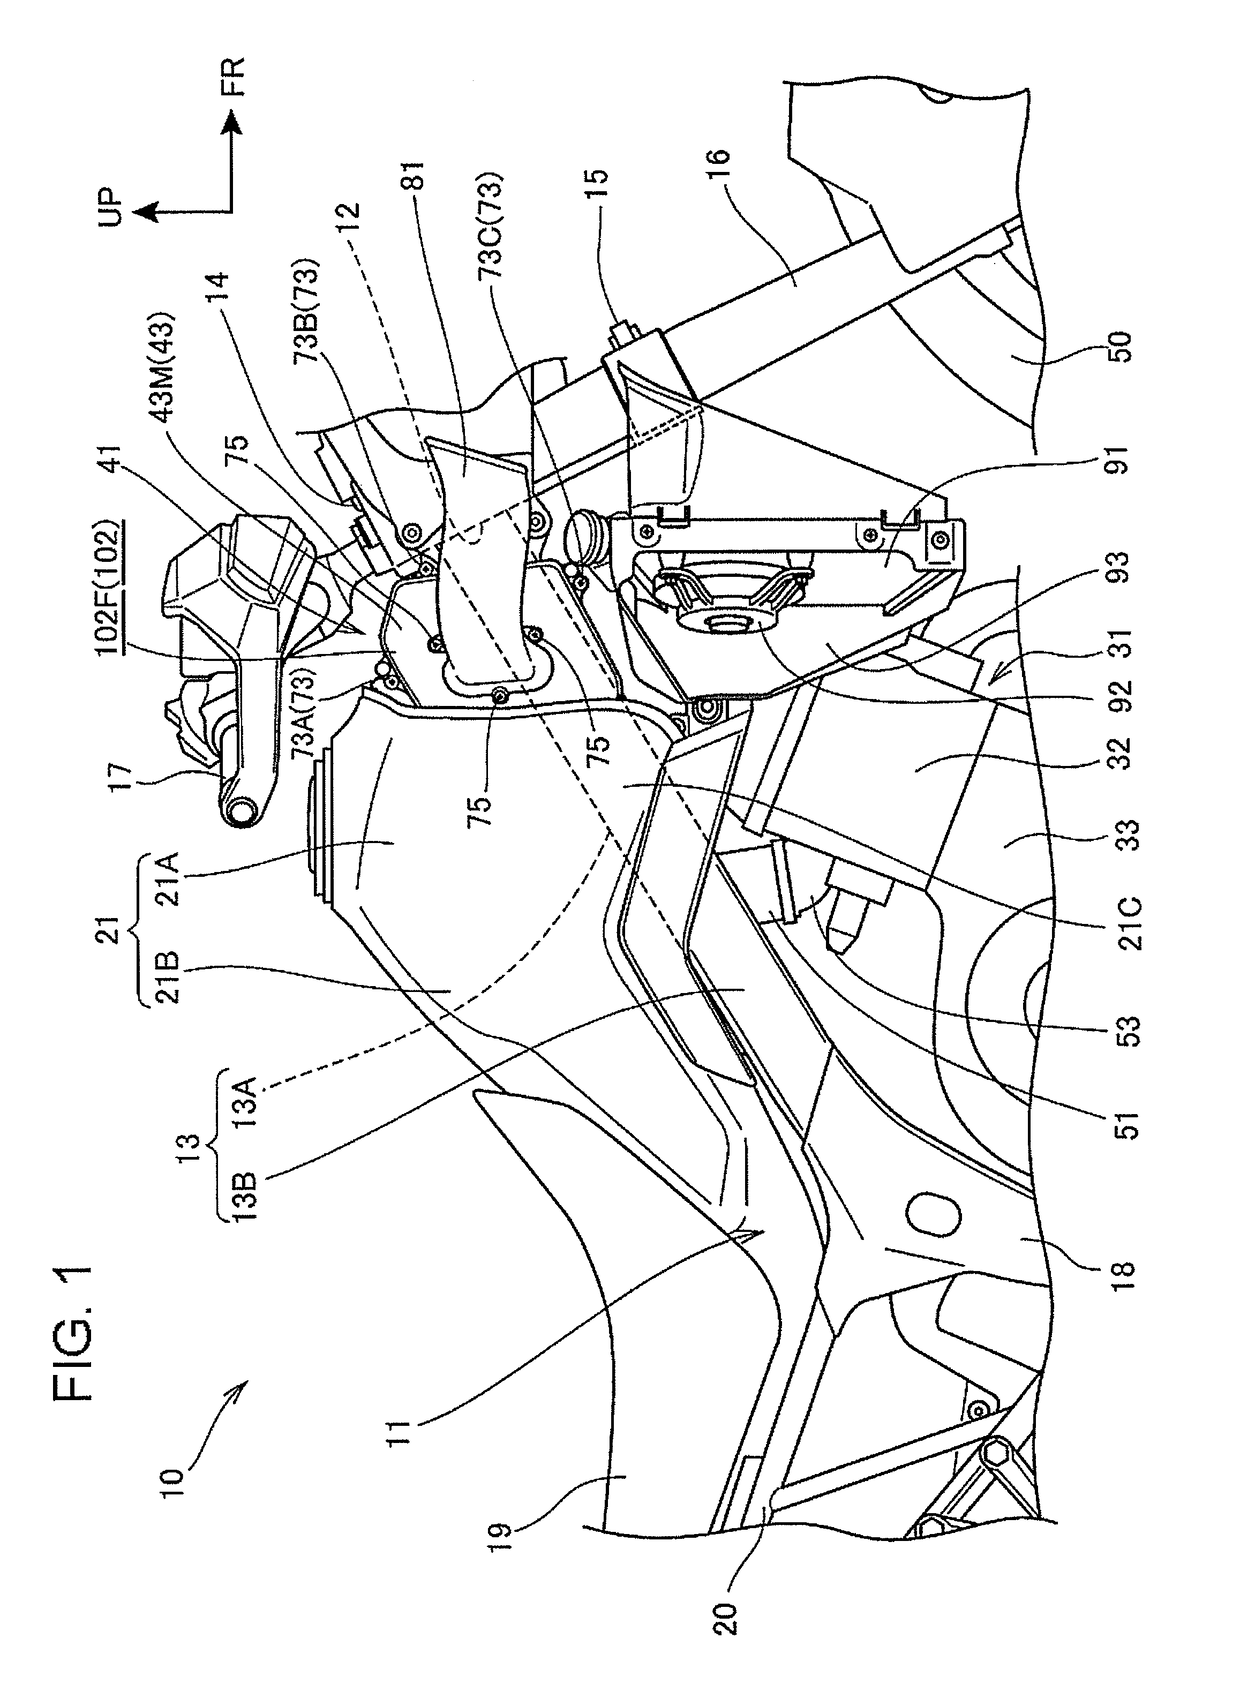 Air intake structure of straddle type vehicle